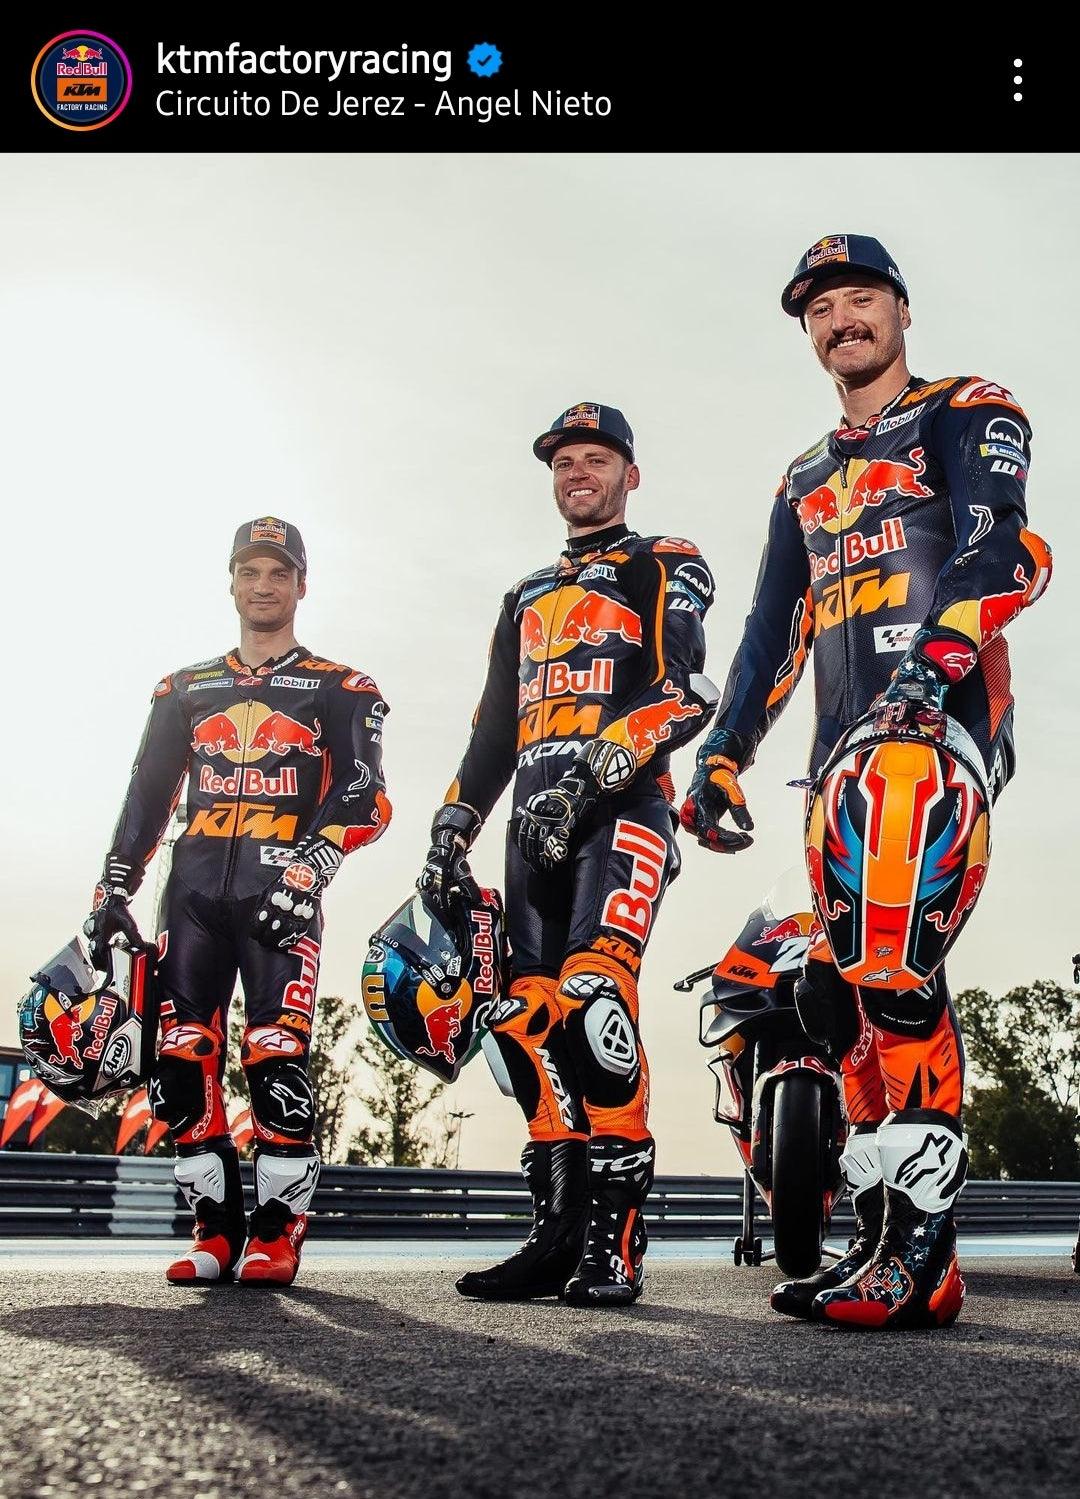 The three musketeers at Jerez